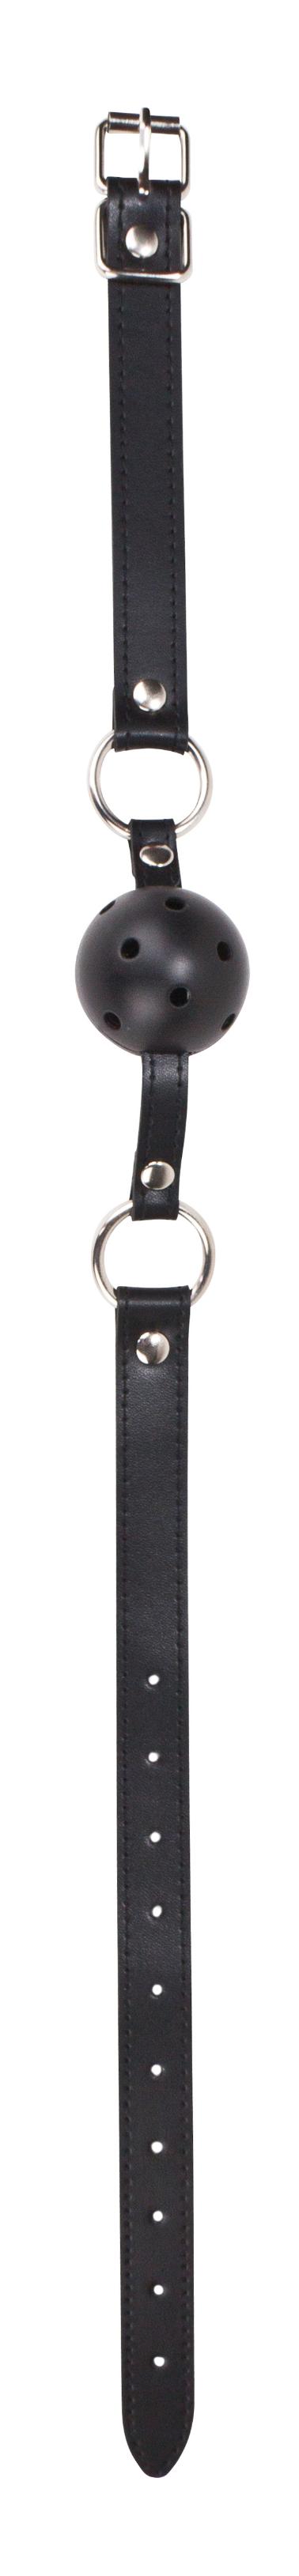 Ball Gag With Leather Straps